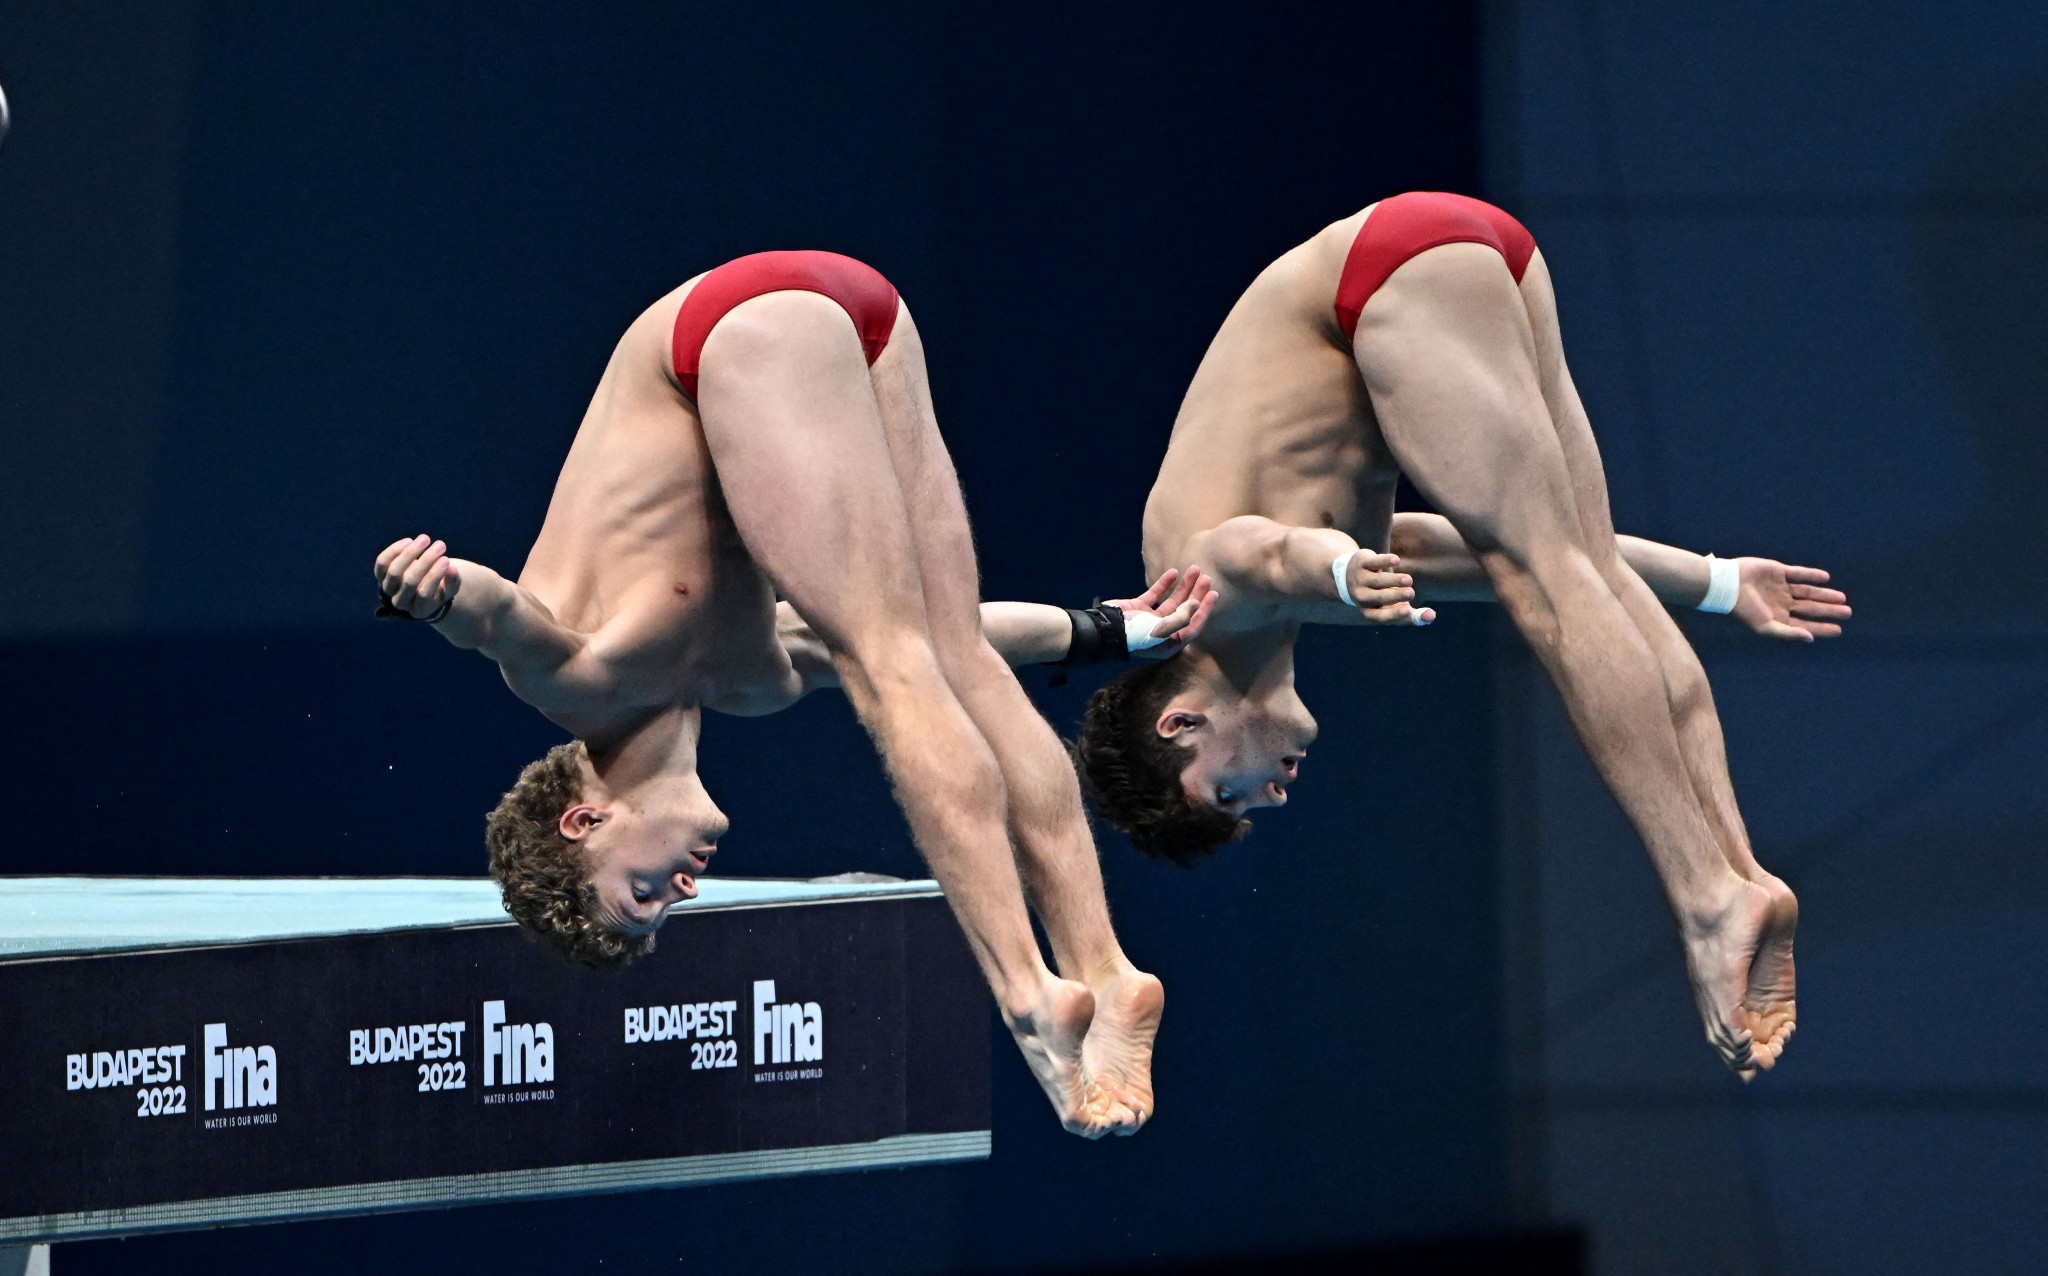 Canada's Rylan Wiens and Nathan Zsombor-Murray won their first FINA World Championships medals with a bronze in the men's 10m platform synchronised event ©Getty Images